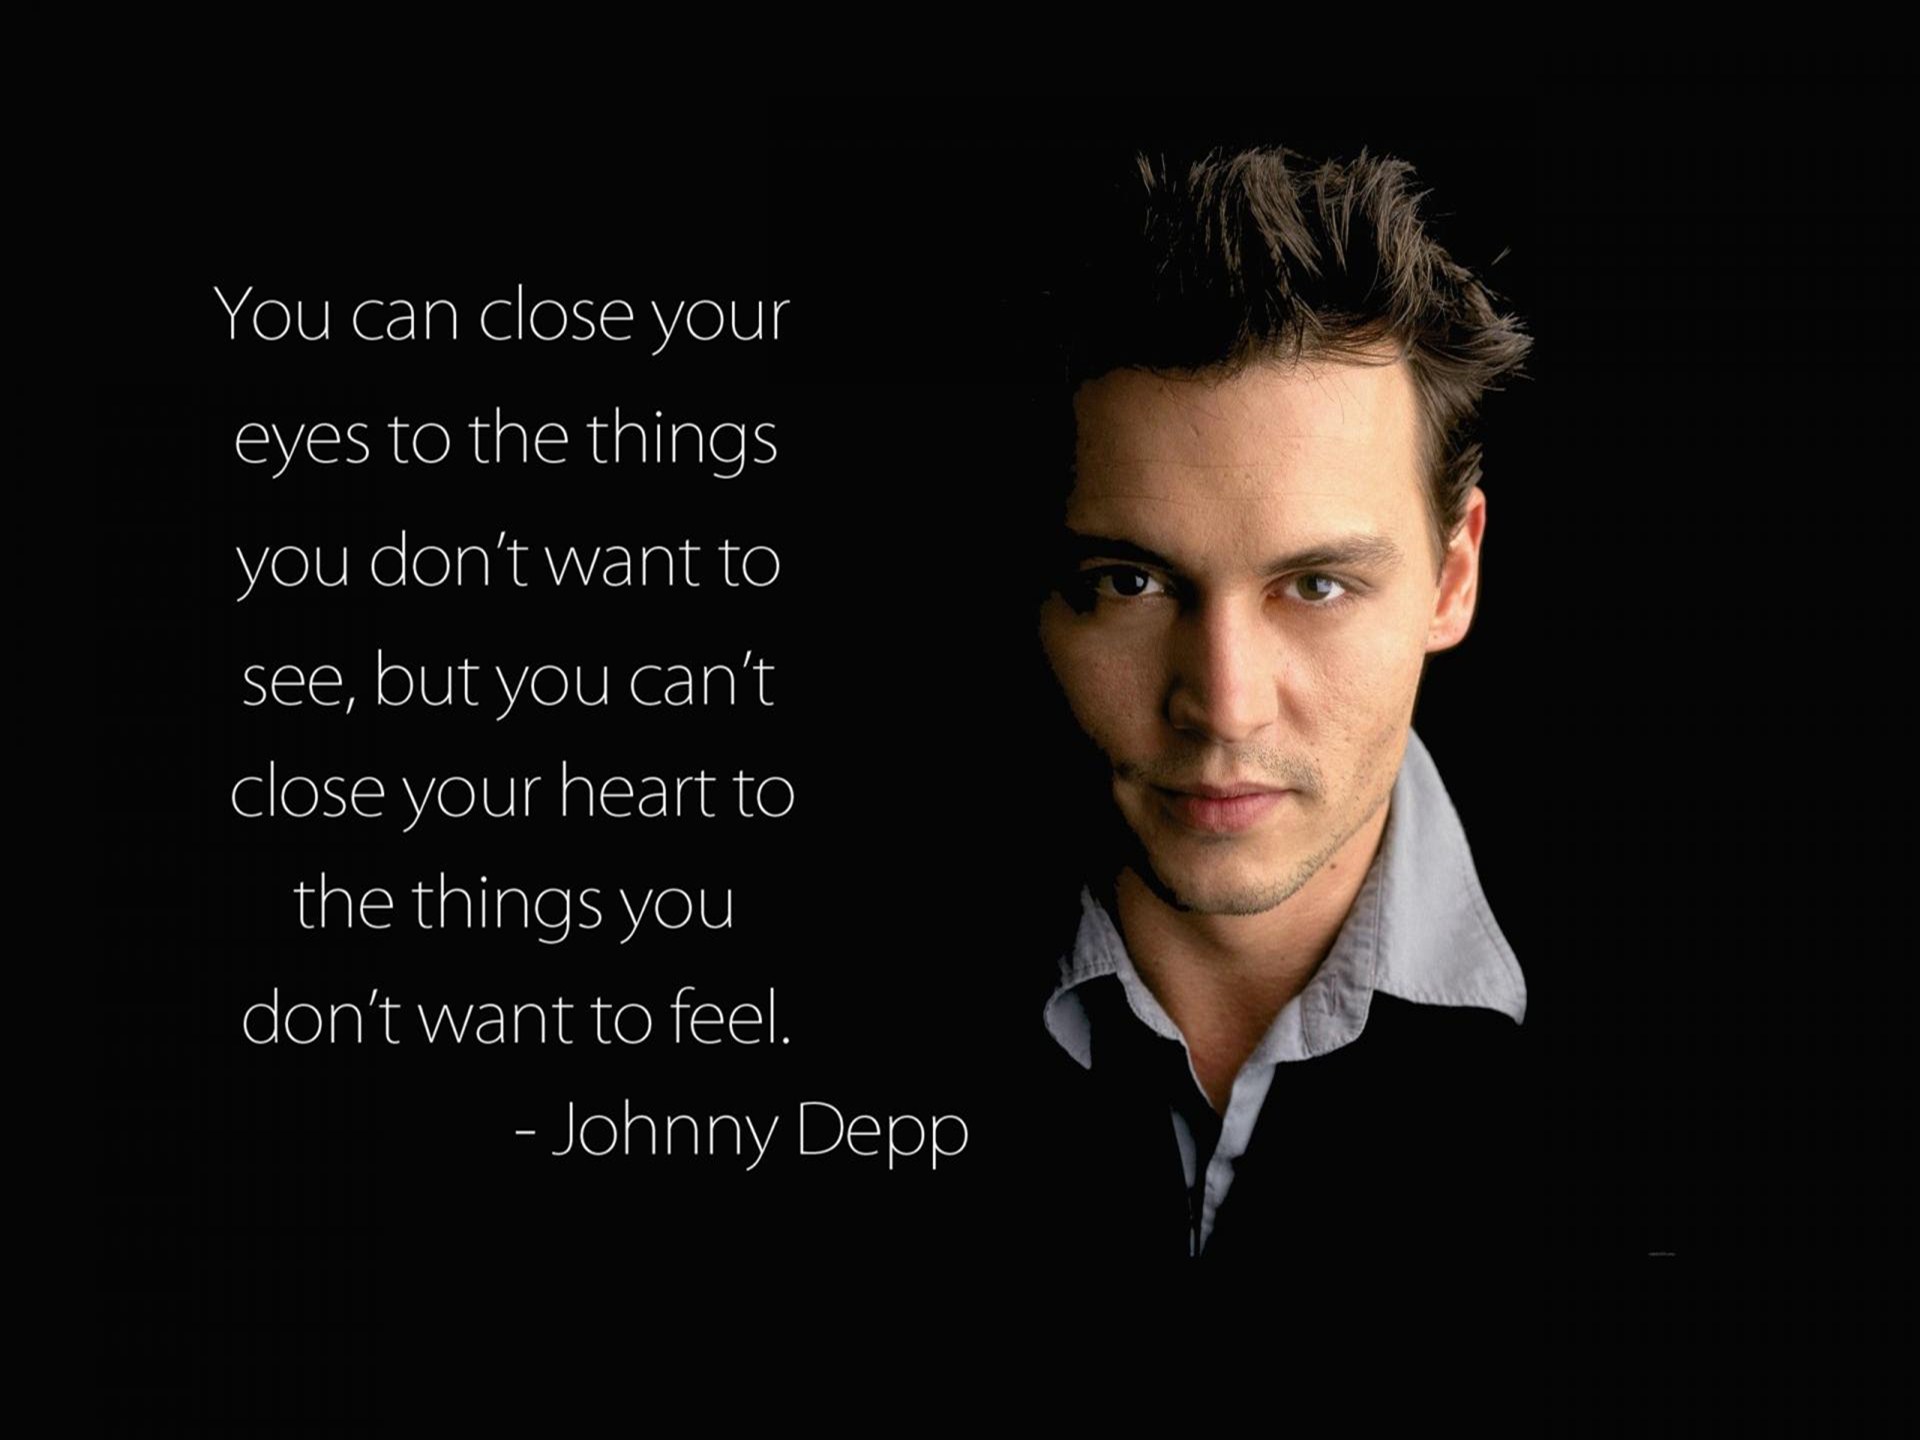 Johnny Depp Quotes Wallpaper HD Background Image Pics Photos